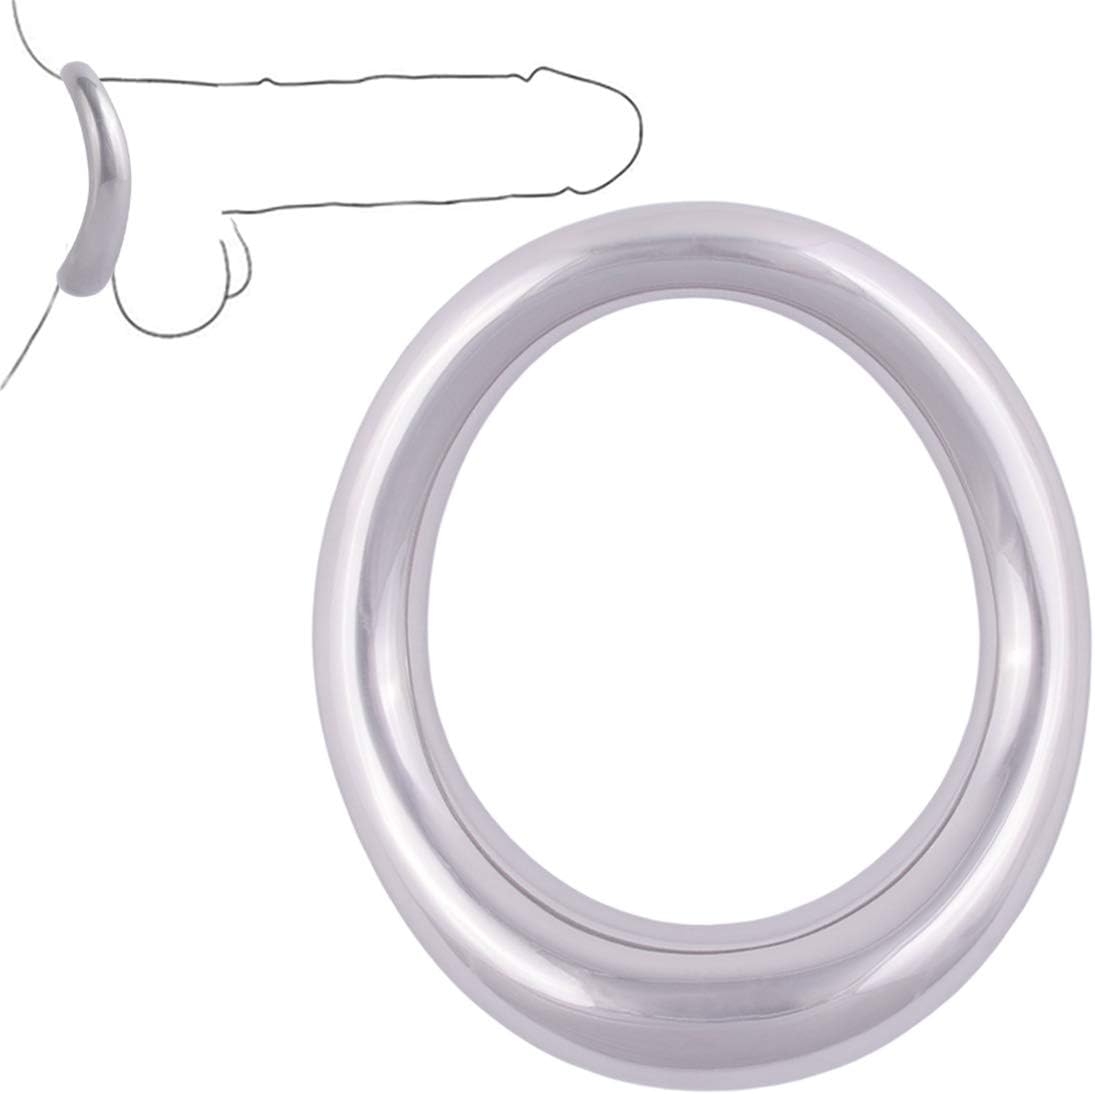 Cock Ring Metal Penis Ring is Sleek and Comfortable Cock Rings for Men Made of Medical Grade Stainless Steel Penis Rings There